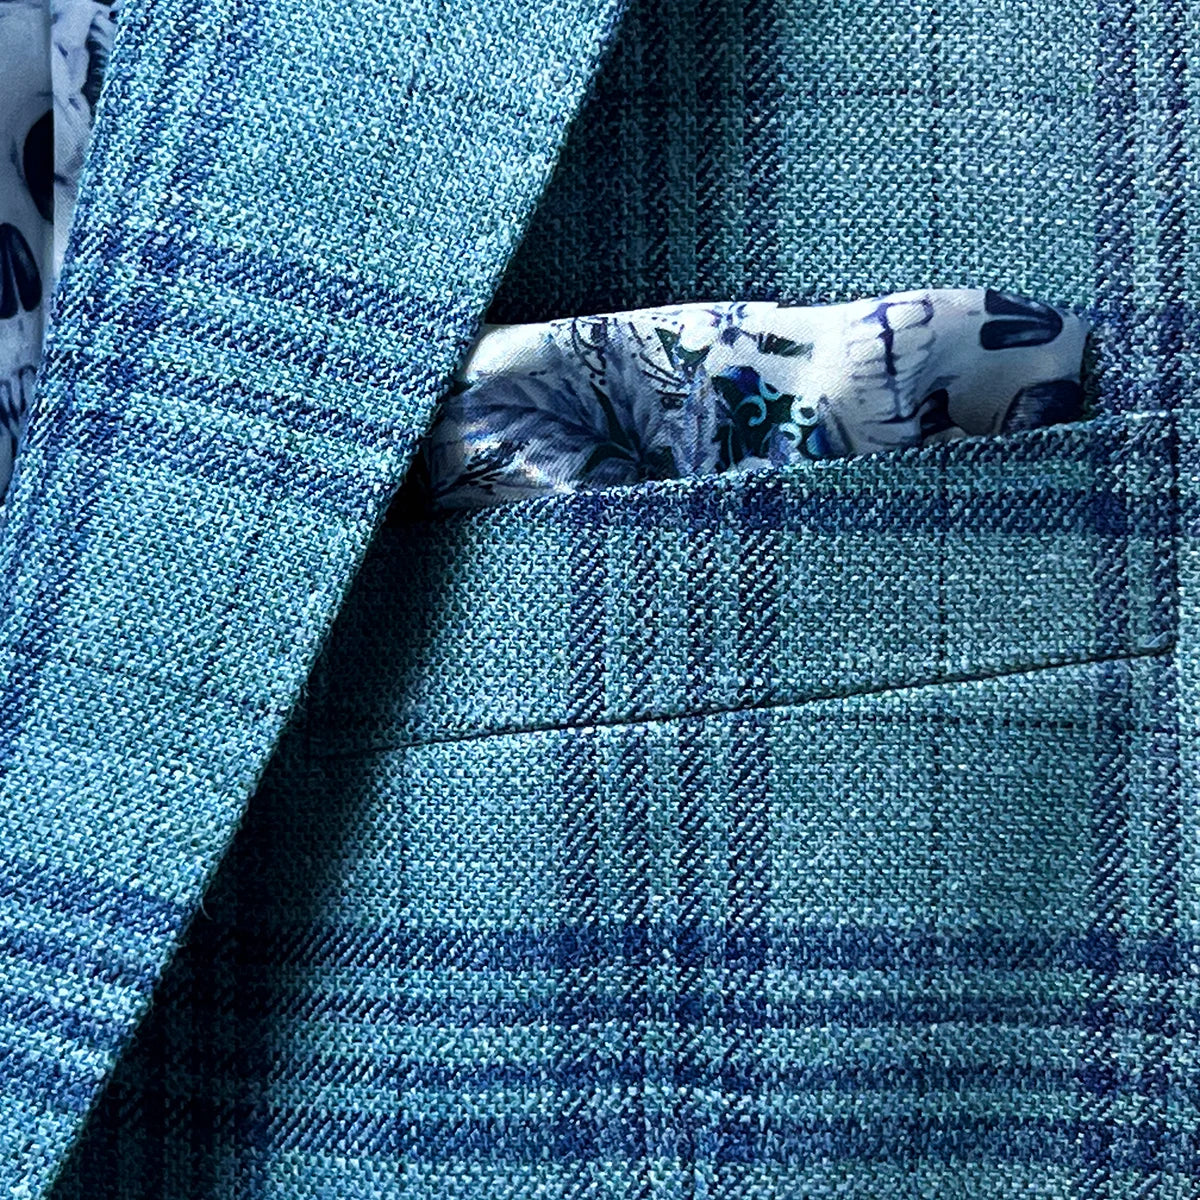 View of the men's sportcoat's built-in pocket square in skull blue lining.